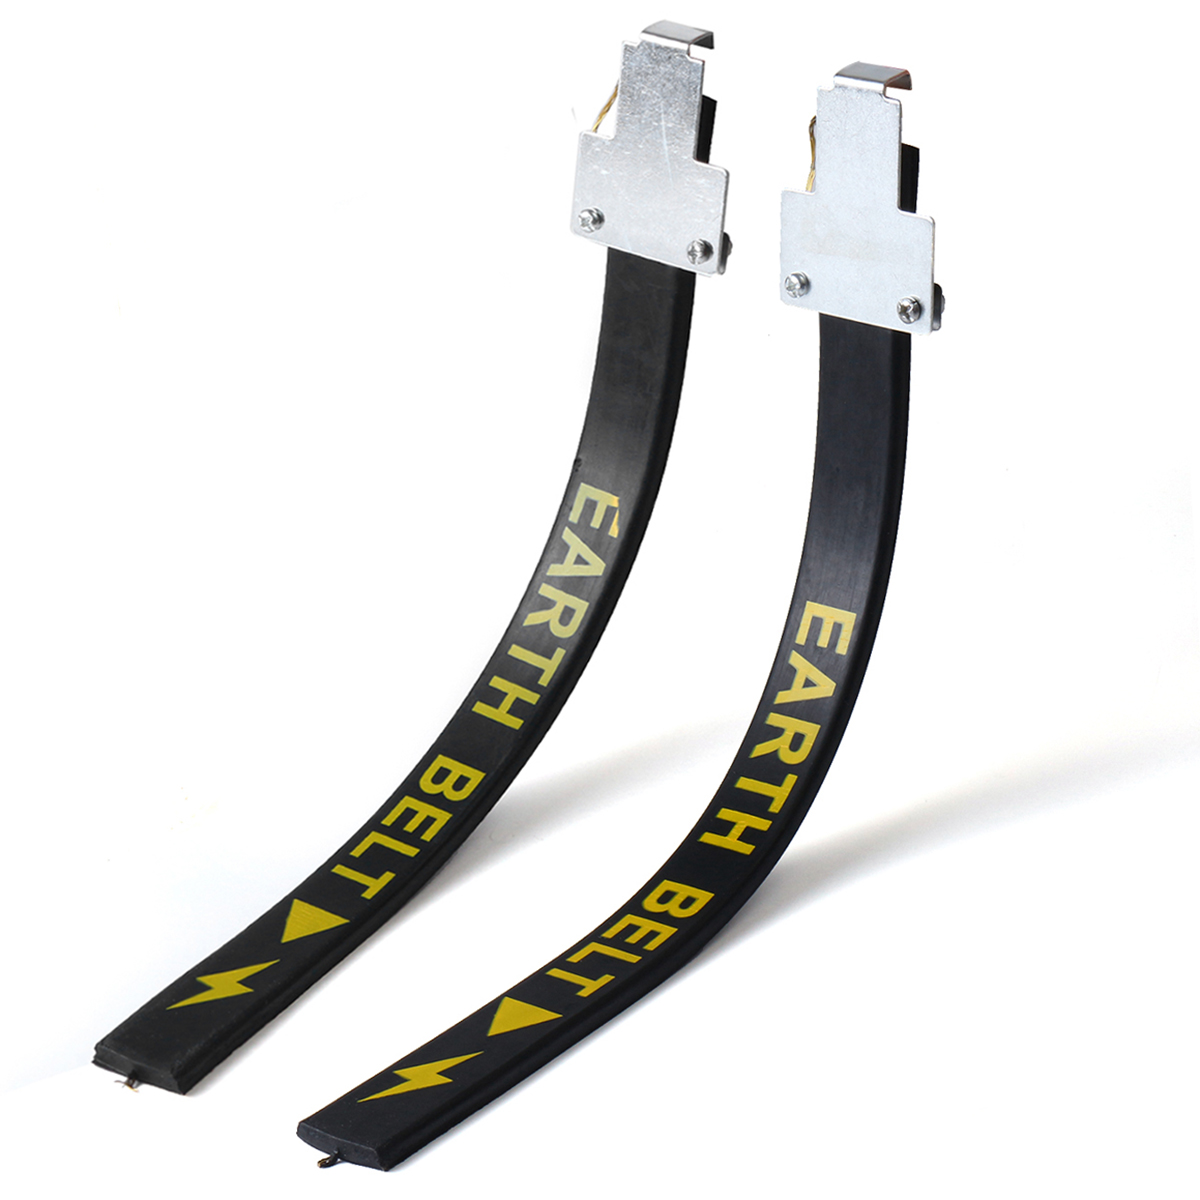 Car-SUV-Safe-Anti-Static-Strip-Earth-Belt-Ground-Wire-Strap-Vehicle-Driving-Tool-Car-Moulding-Trim-S-1518286